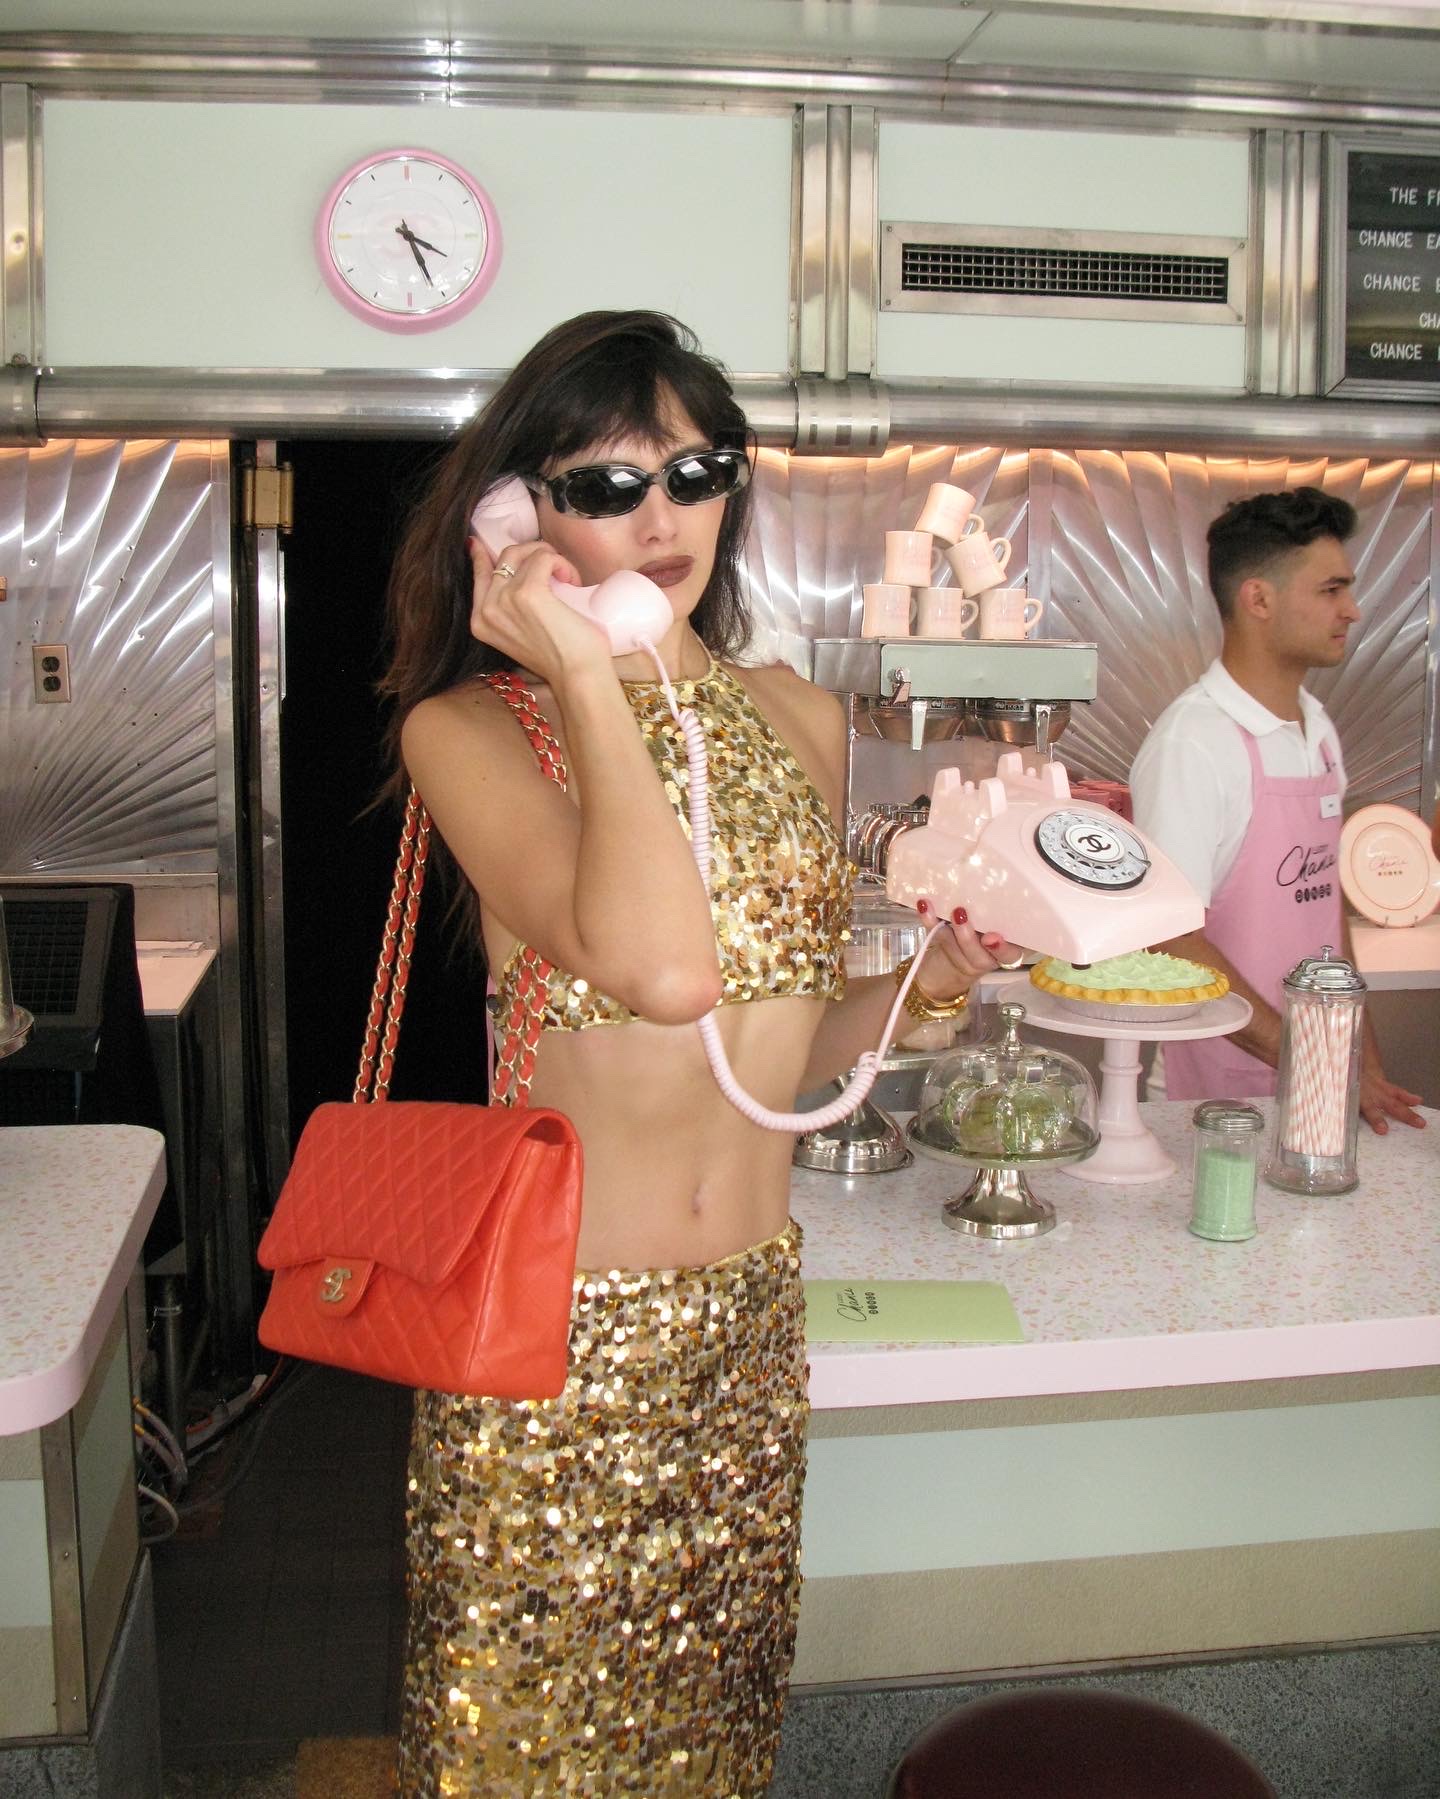 CHANEL LUCKY CHANCE DINER! - NATALIE OFF DUTY